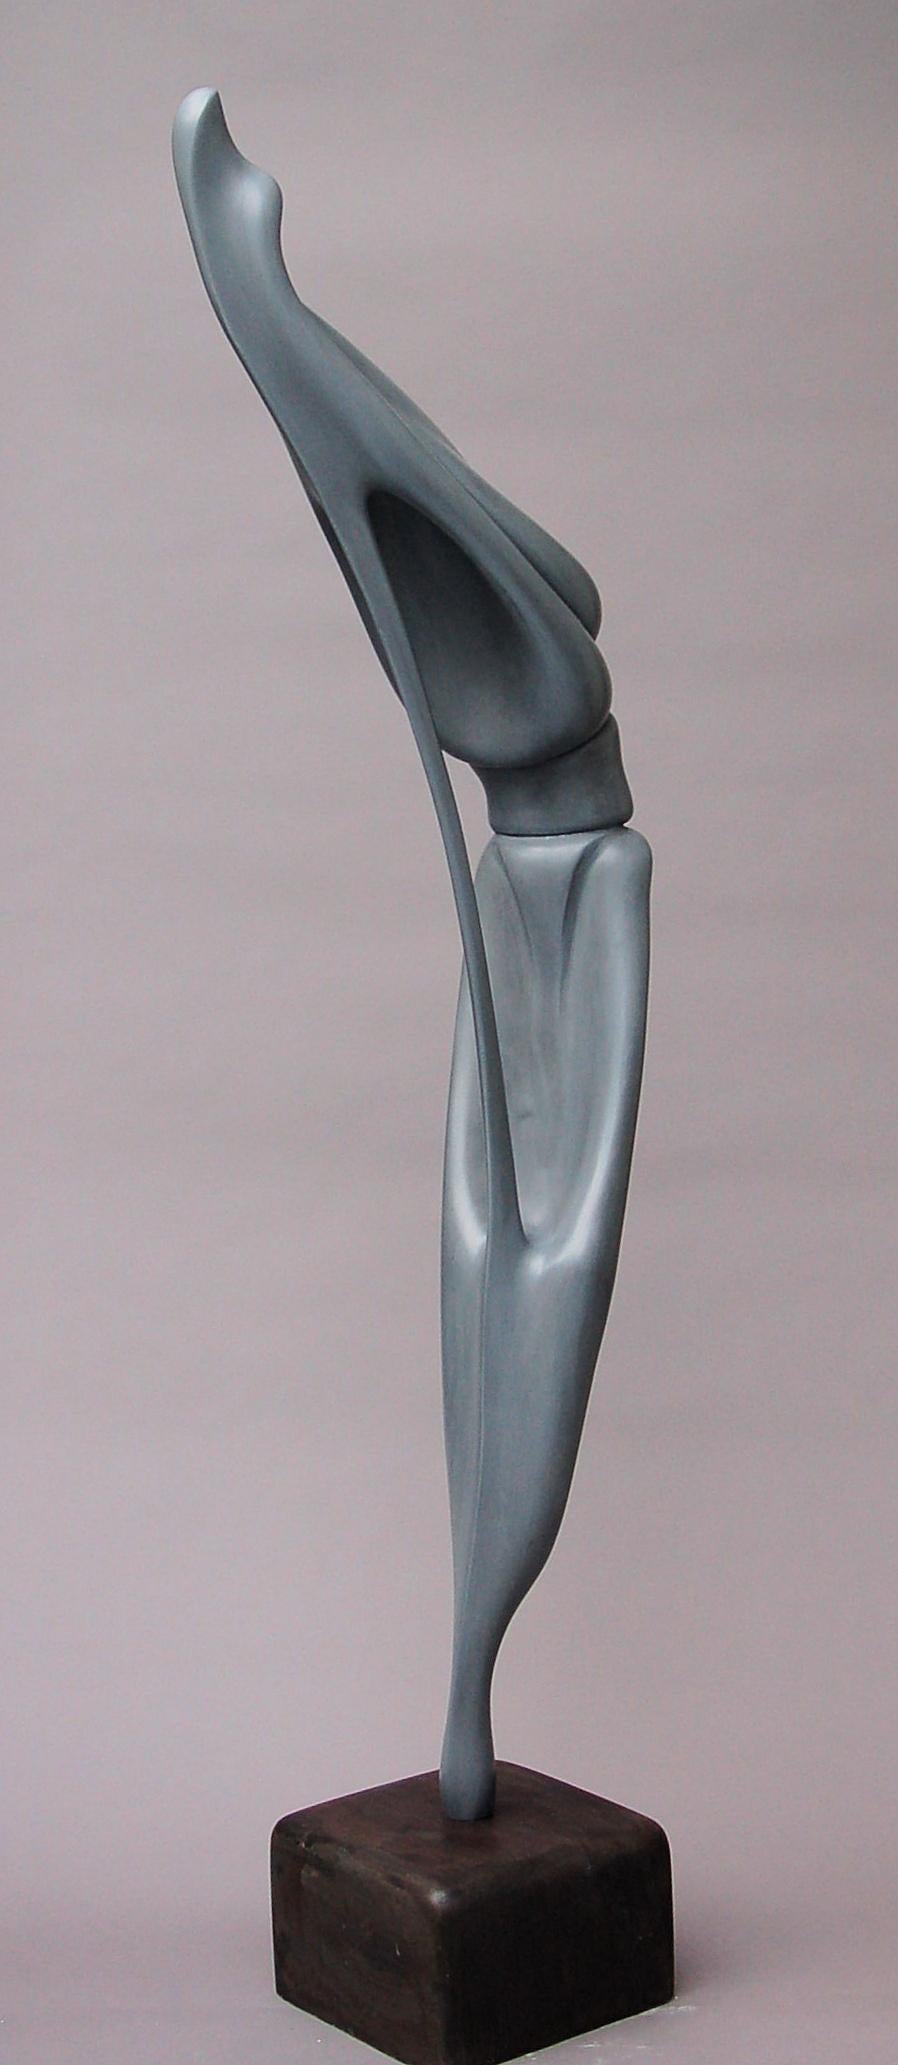 Archer
Fiberglass / Carbon Fibre impregnated with catalysed polyester resin Powder filled acrylic lacquer on filled polyester resin base
58